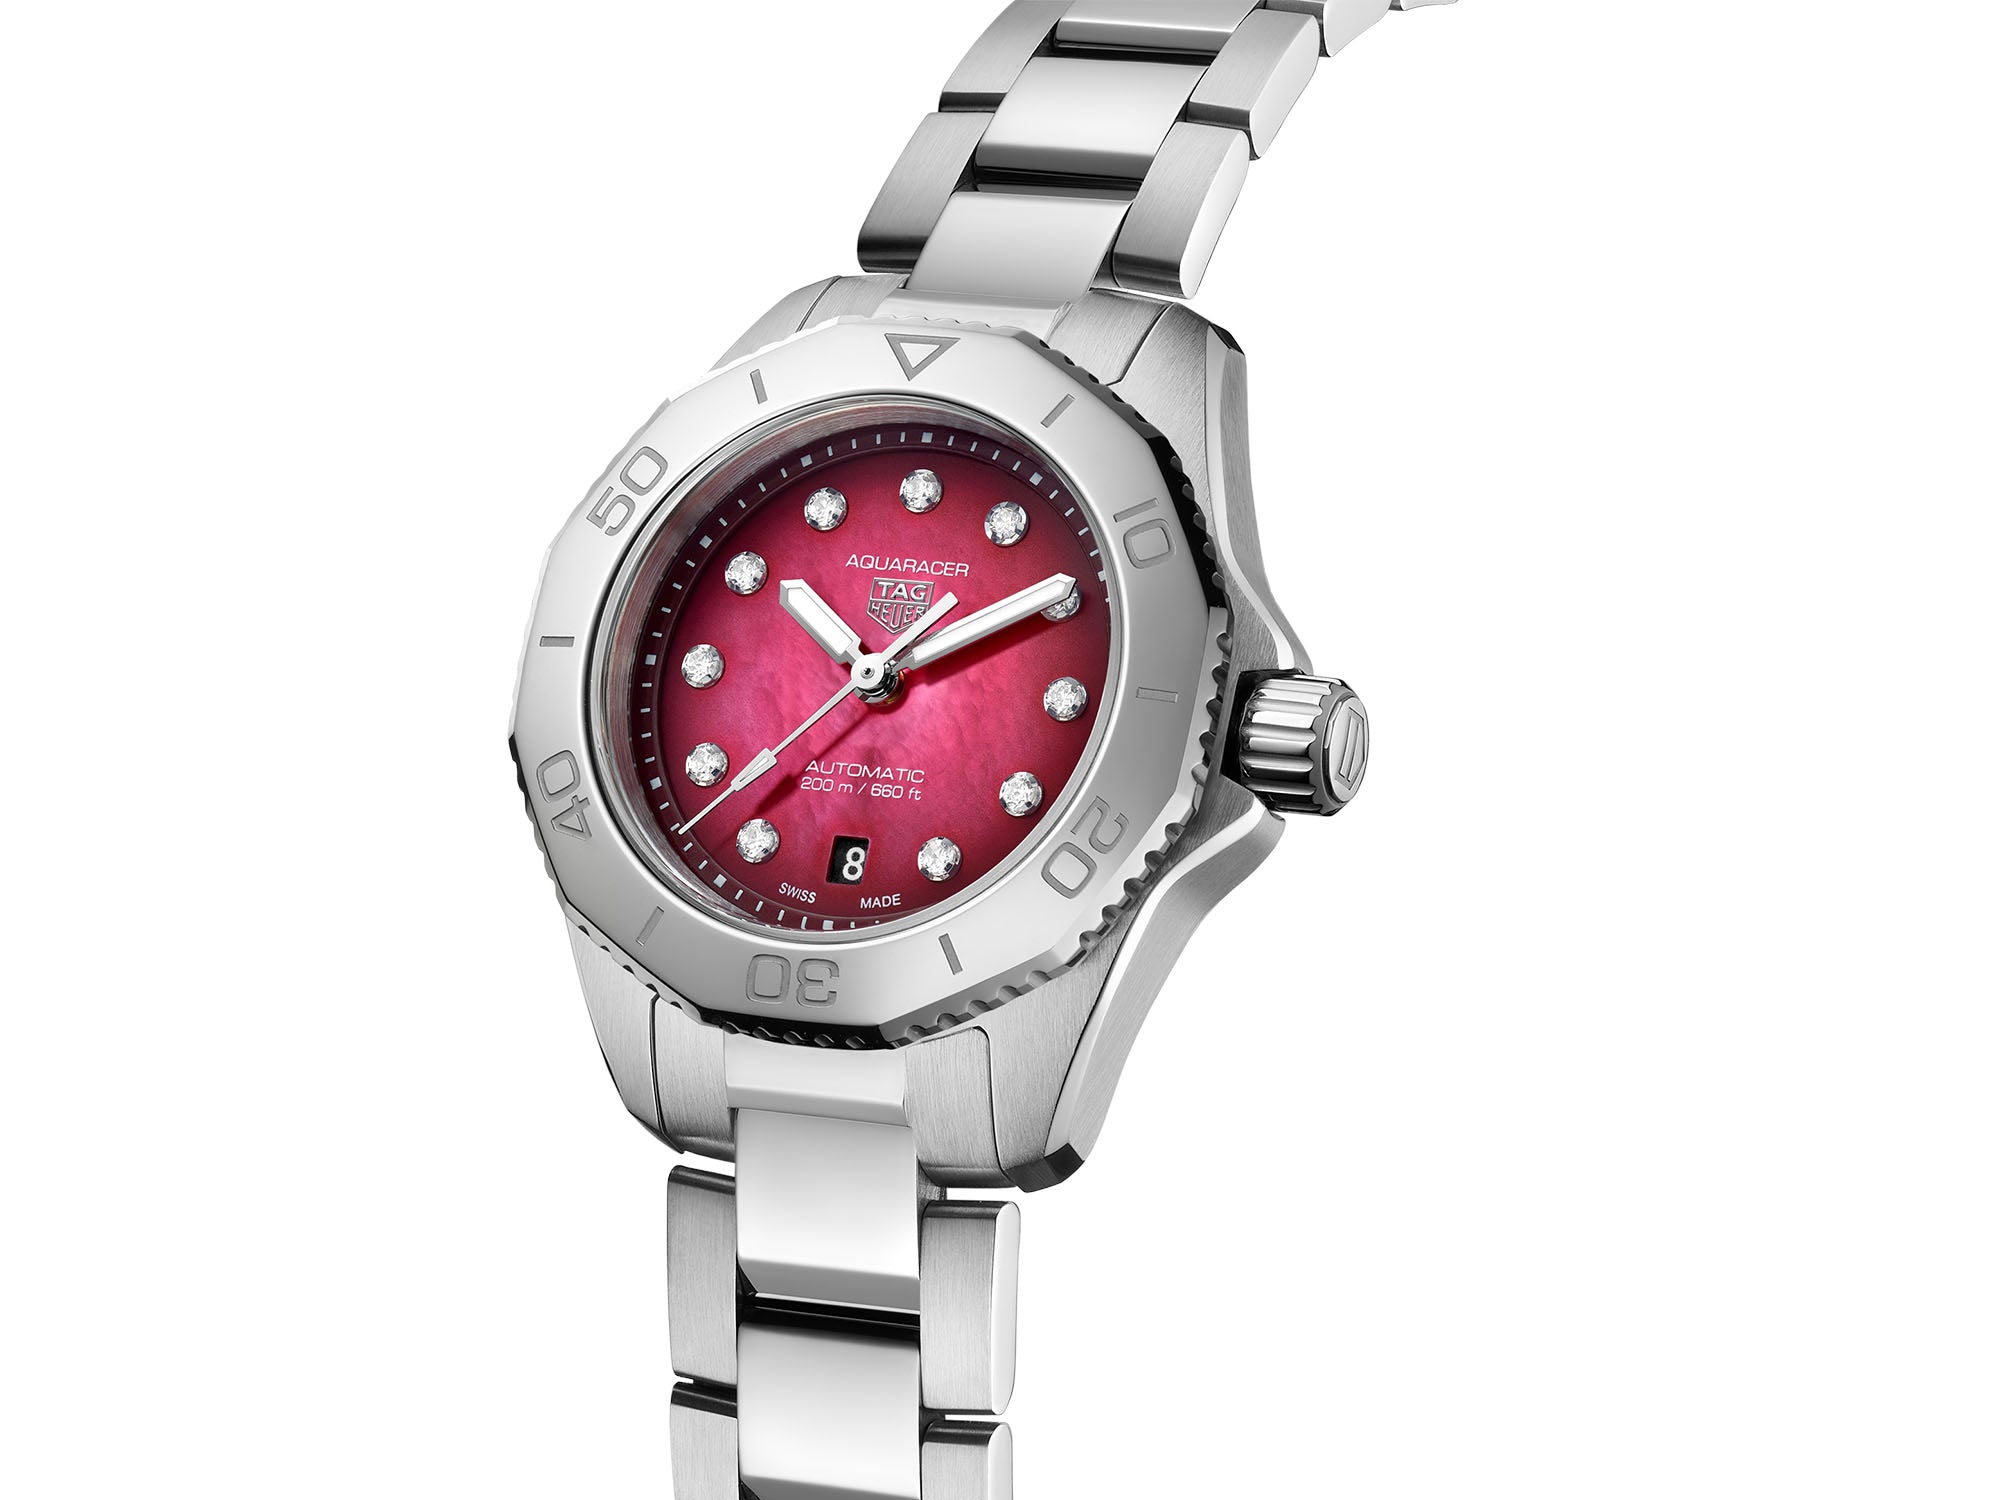 TAG Heuer Aquaracer Date 200 Cherry Red